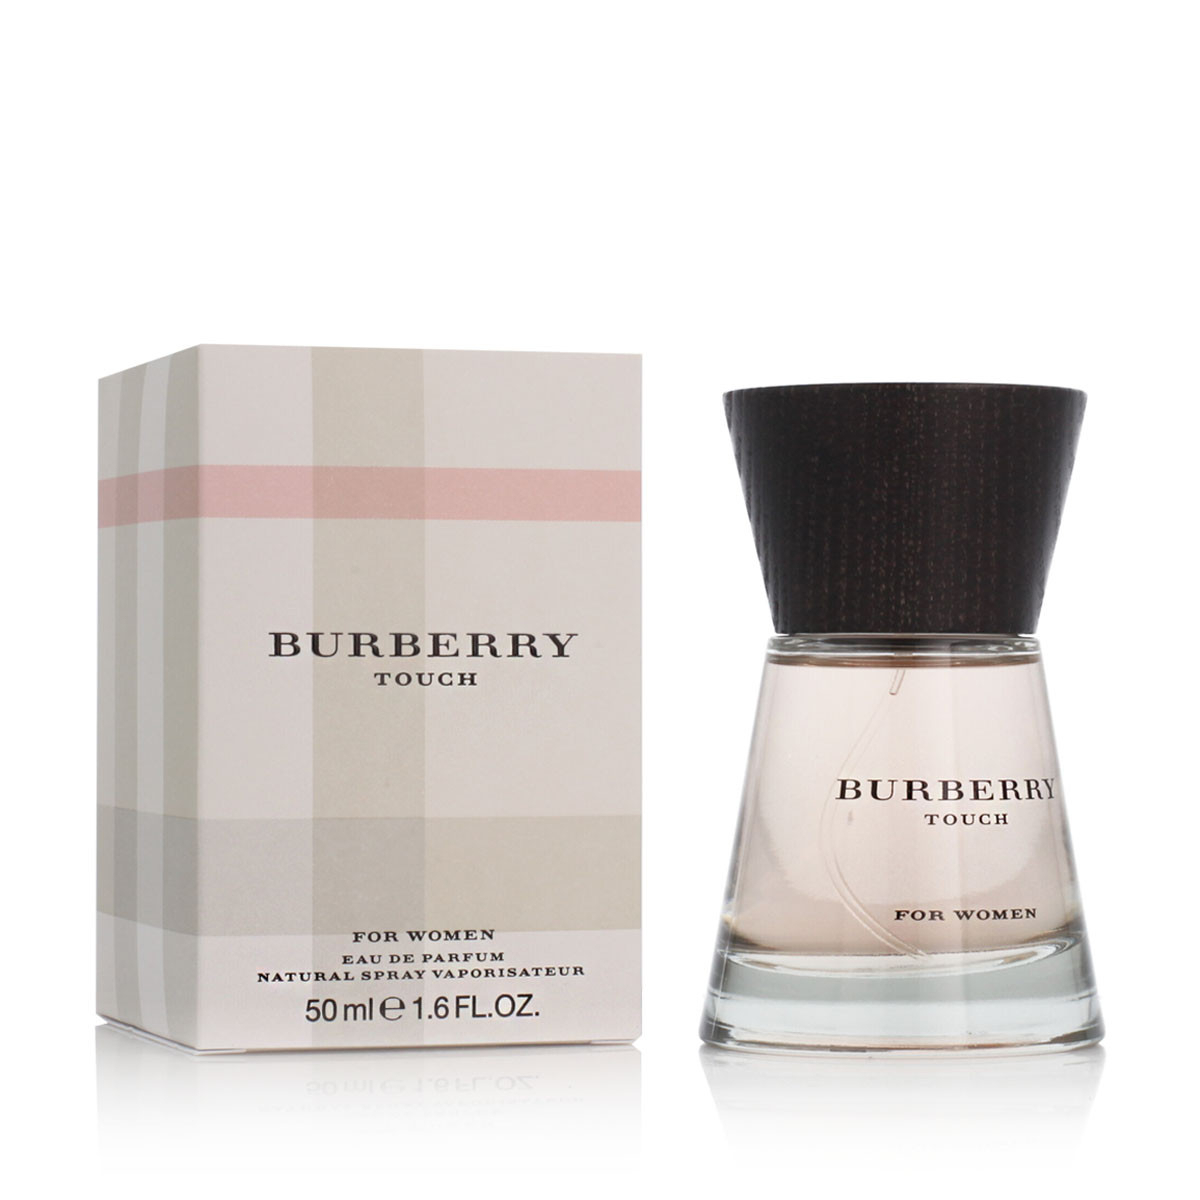 Burberry Touch For Women EDP 1.6fl